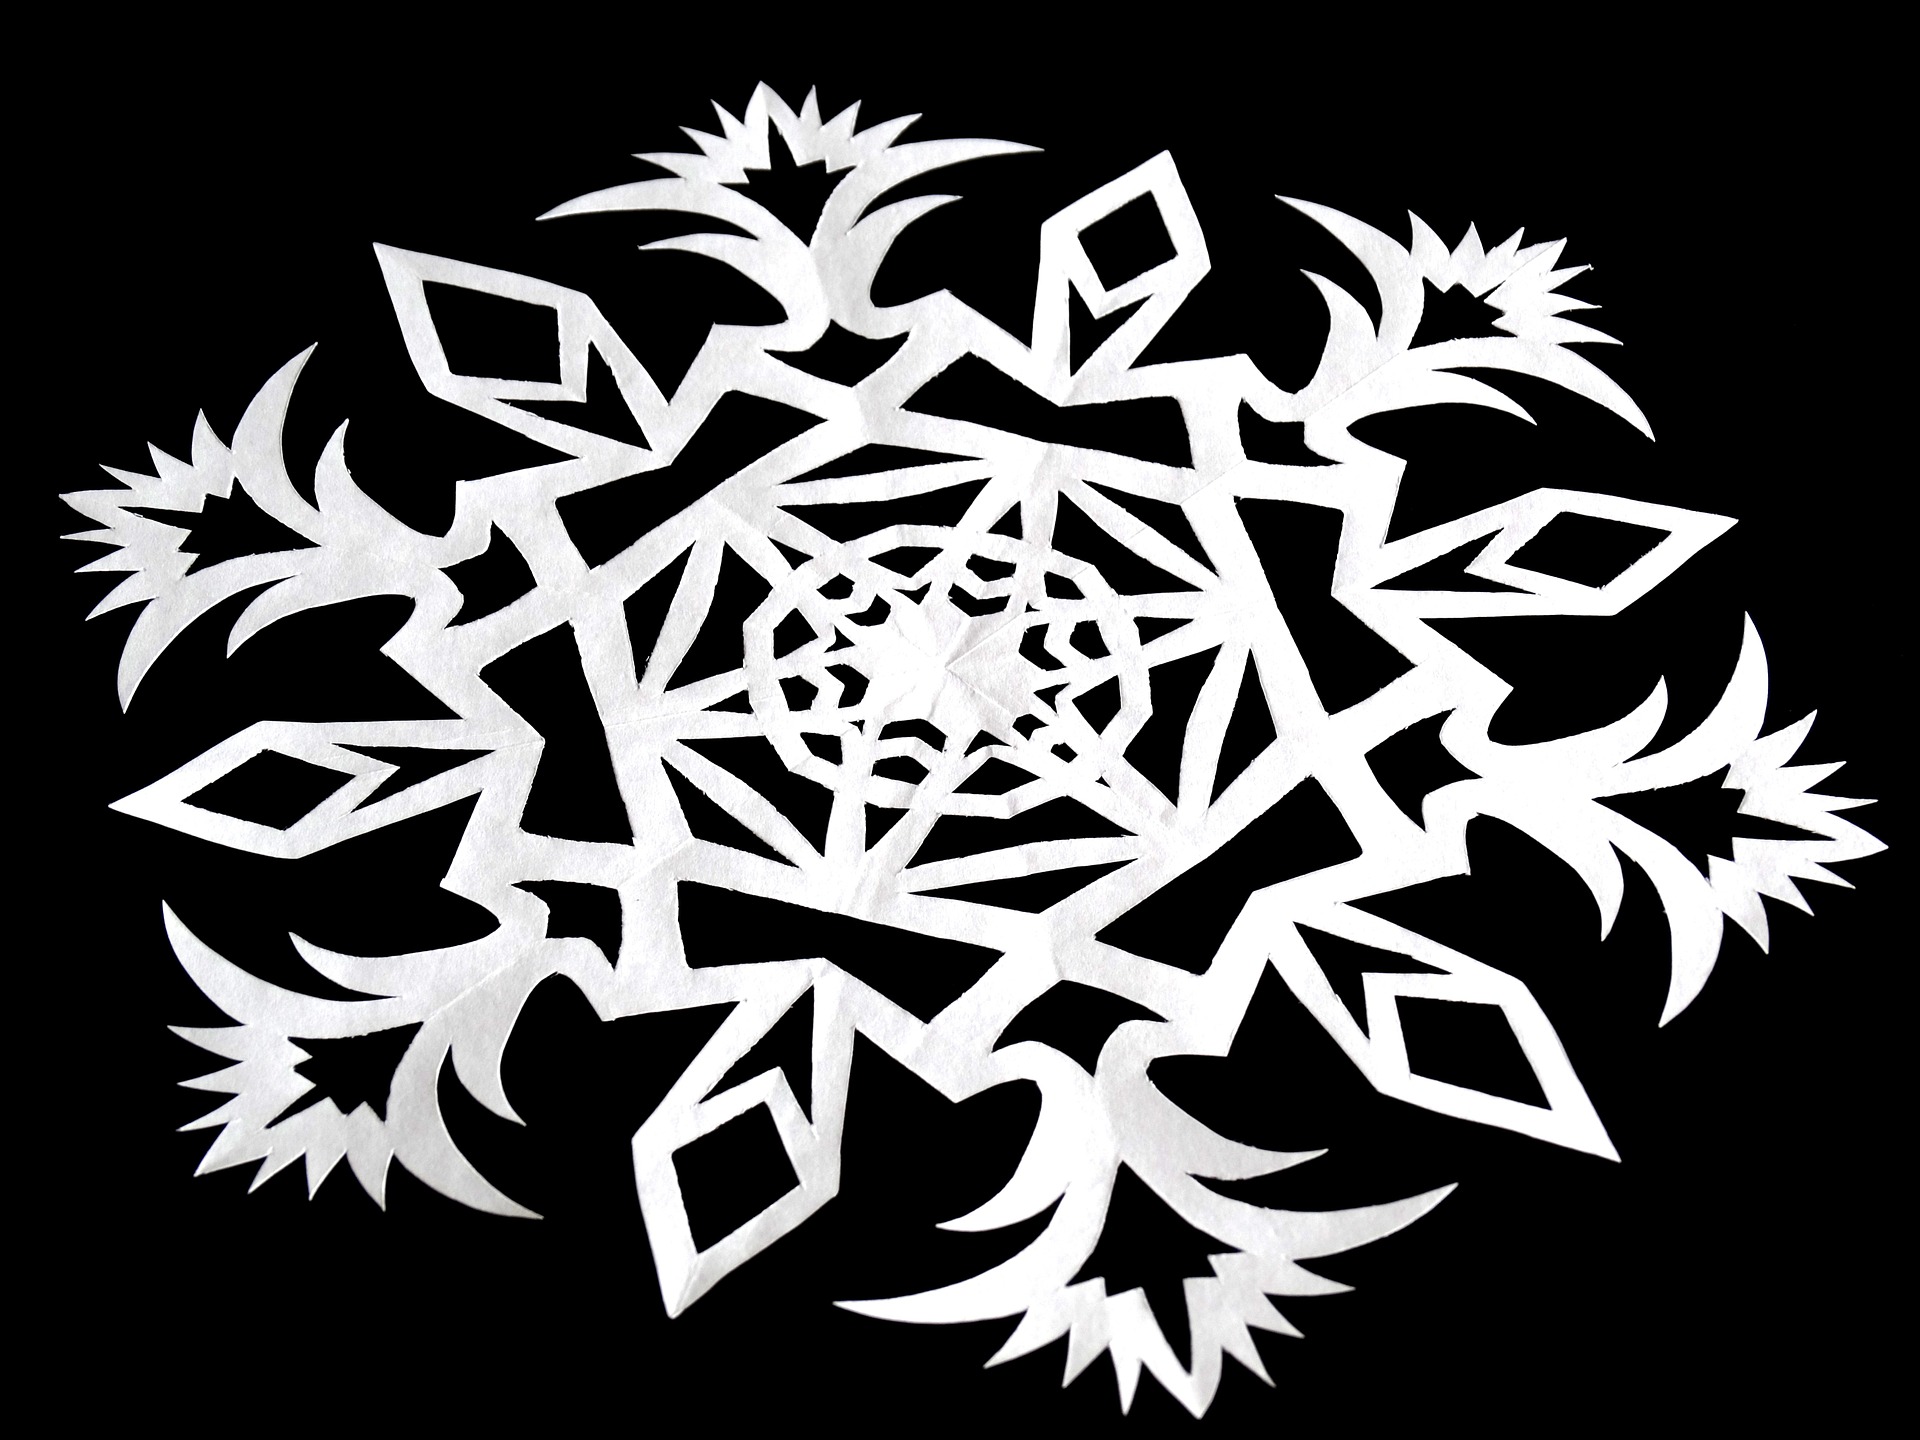 A paper snowflake on a black background.